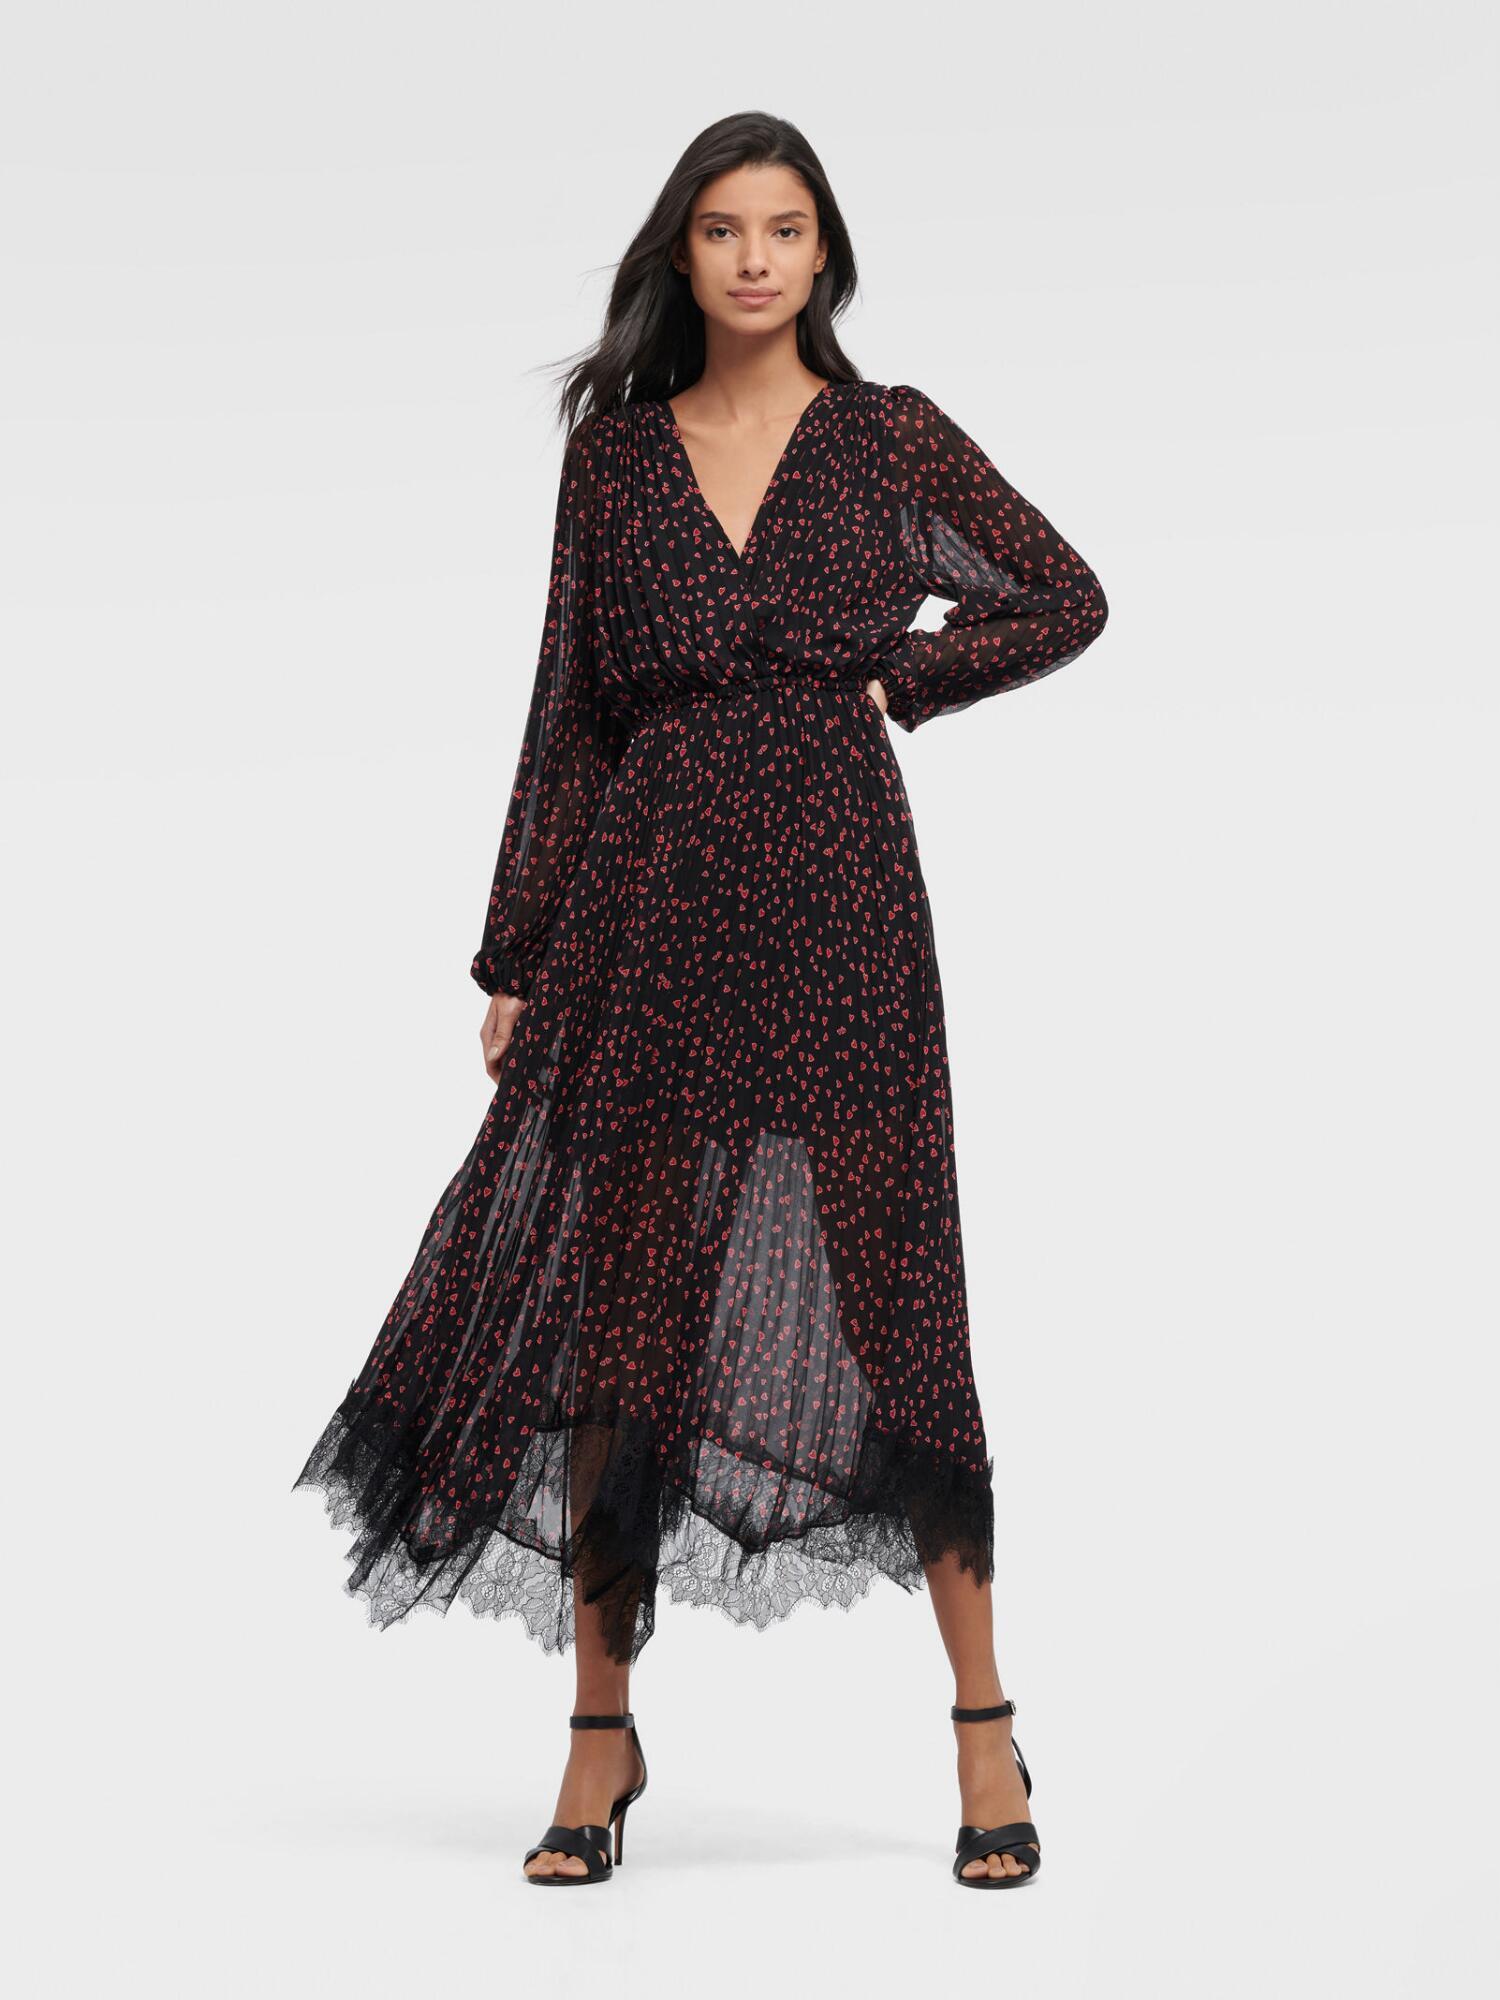 DKNY Printed Pleated Wrap Midi Dress With Lace in Black/Red (Black) | Lyst